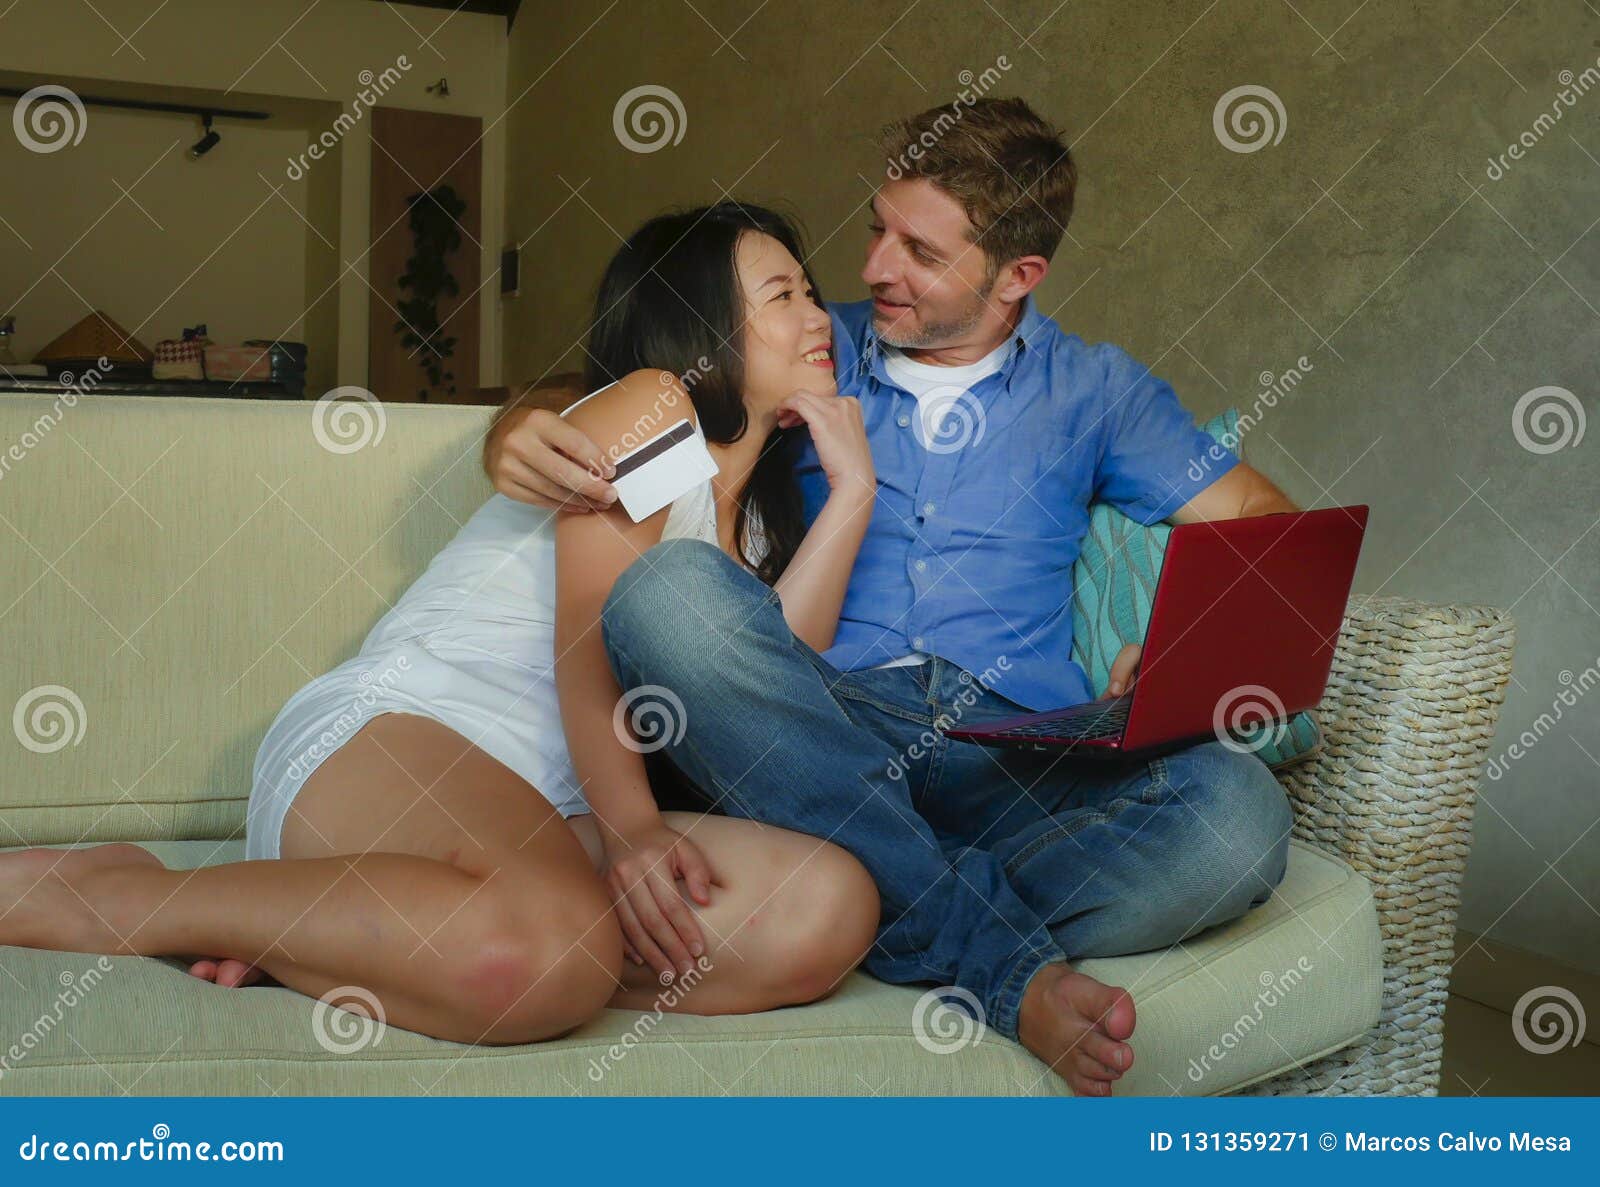 young-happy-excited-mixed-ethnicity-couple-asian-chinese-woman-white-man-internet-banking-online-shopping-cr-credit-card-131359271.jpg